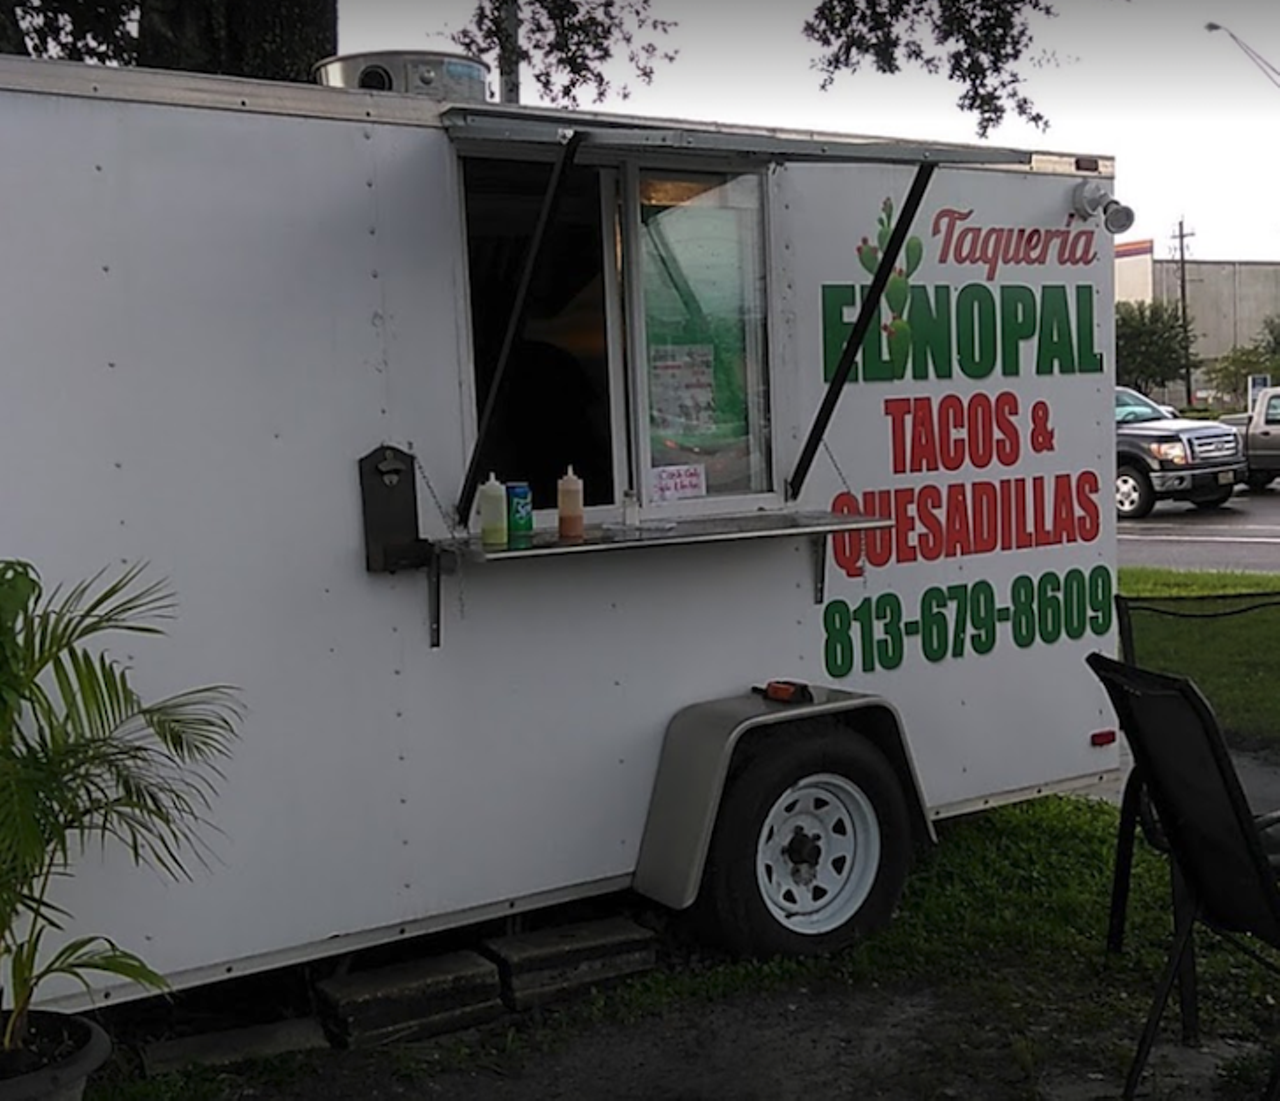 Taquer&iacute;a El Nopal   
8307 N Dale Mabry Hwy, Tampa, 813-679-8609
Another tiny taco truck is holding its own on Dale Mabry Hwy. Great place for a quick lunch break or need a no frills type meal packed with flavor.
Photo via Google Maps